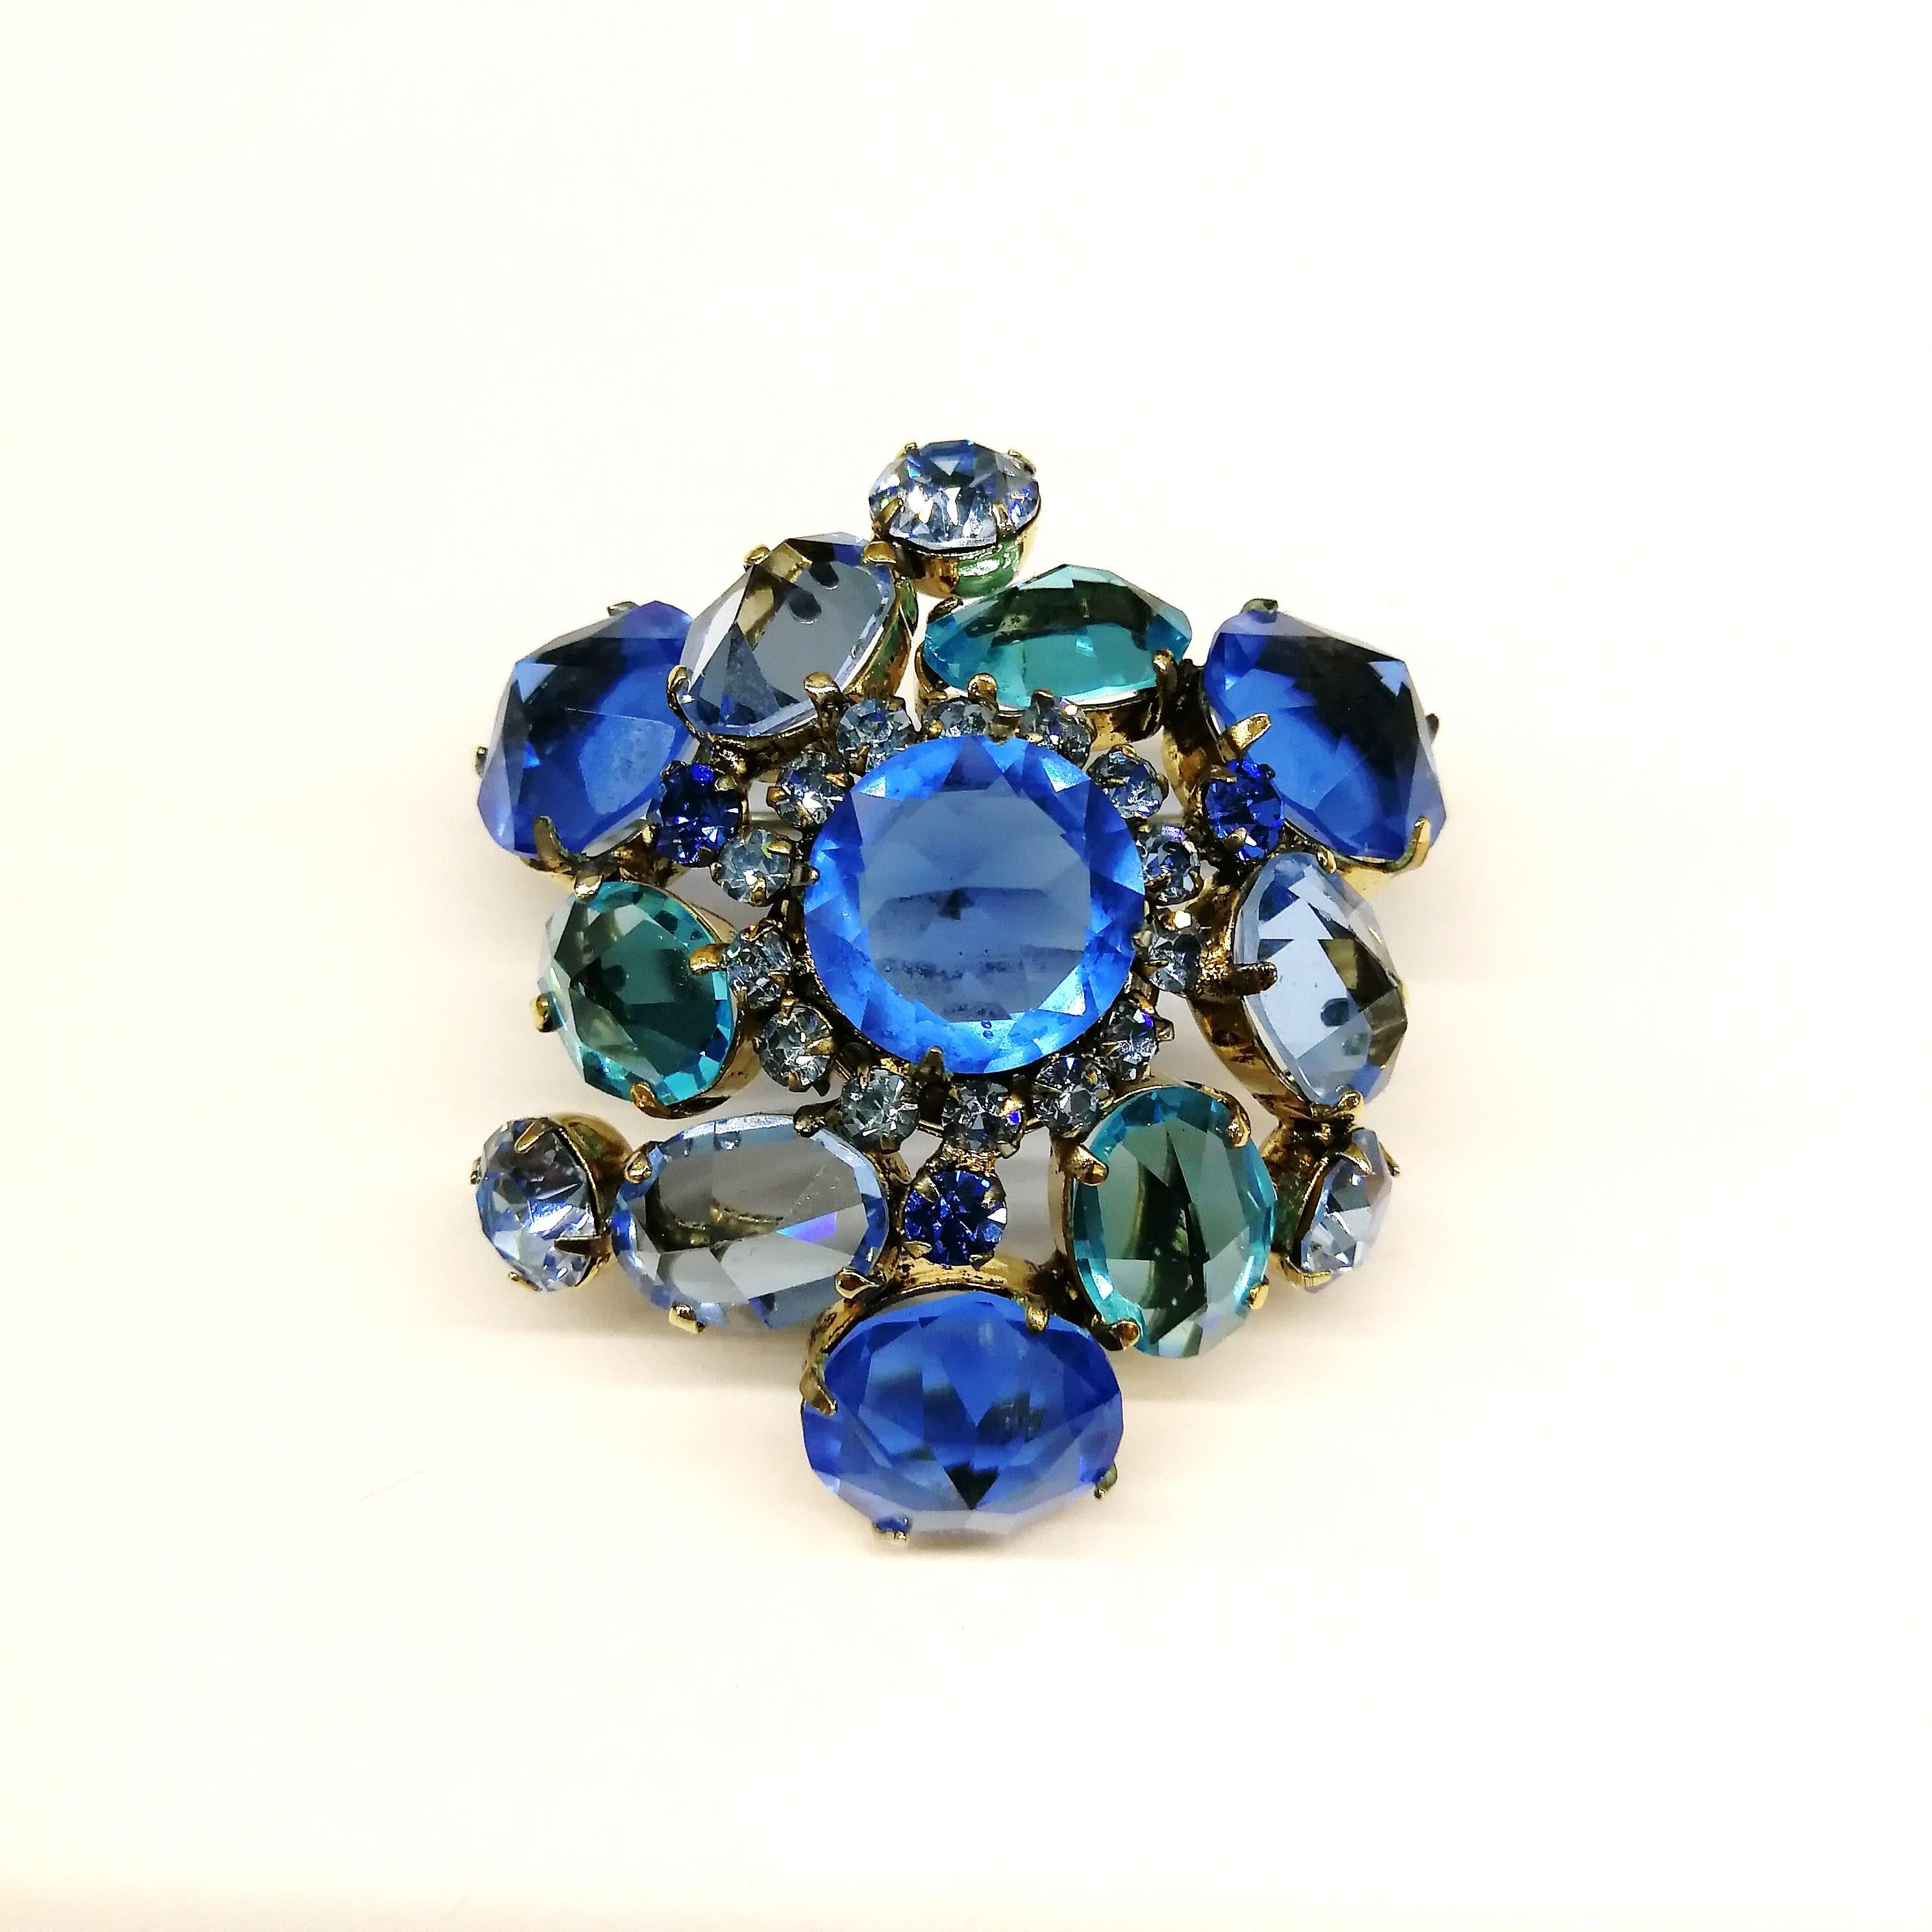 A beautiful, lush 'cluster' brooch, by Schreiner of New York, always a sign of glamour and style. Modest in size but rich and hue and design, varied shades of blues are set in gilded metal, an asymmetrical design, three dimensional,  higgledy